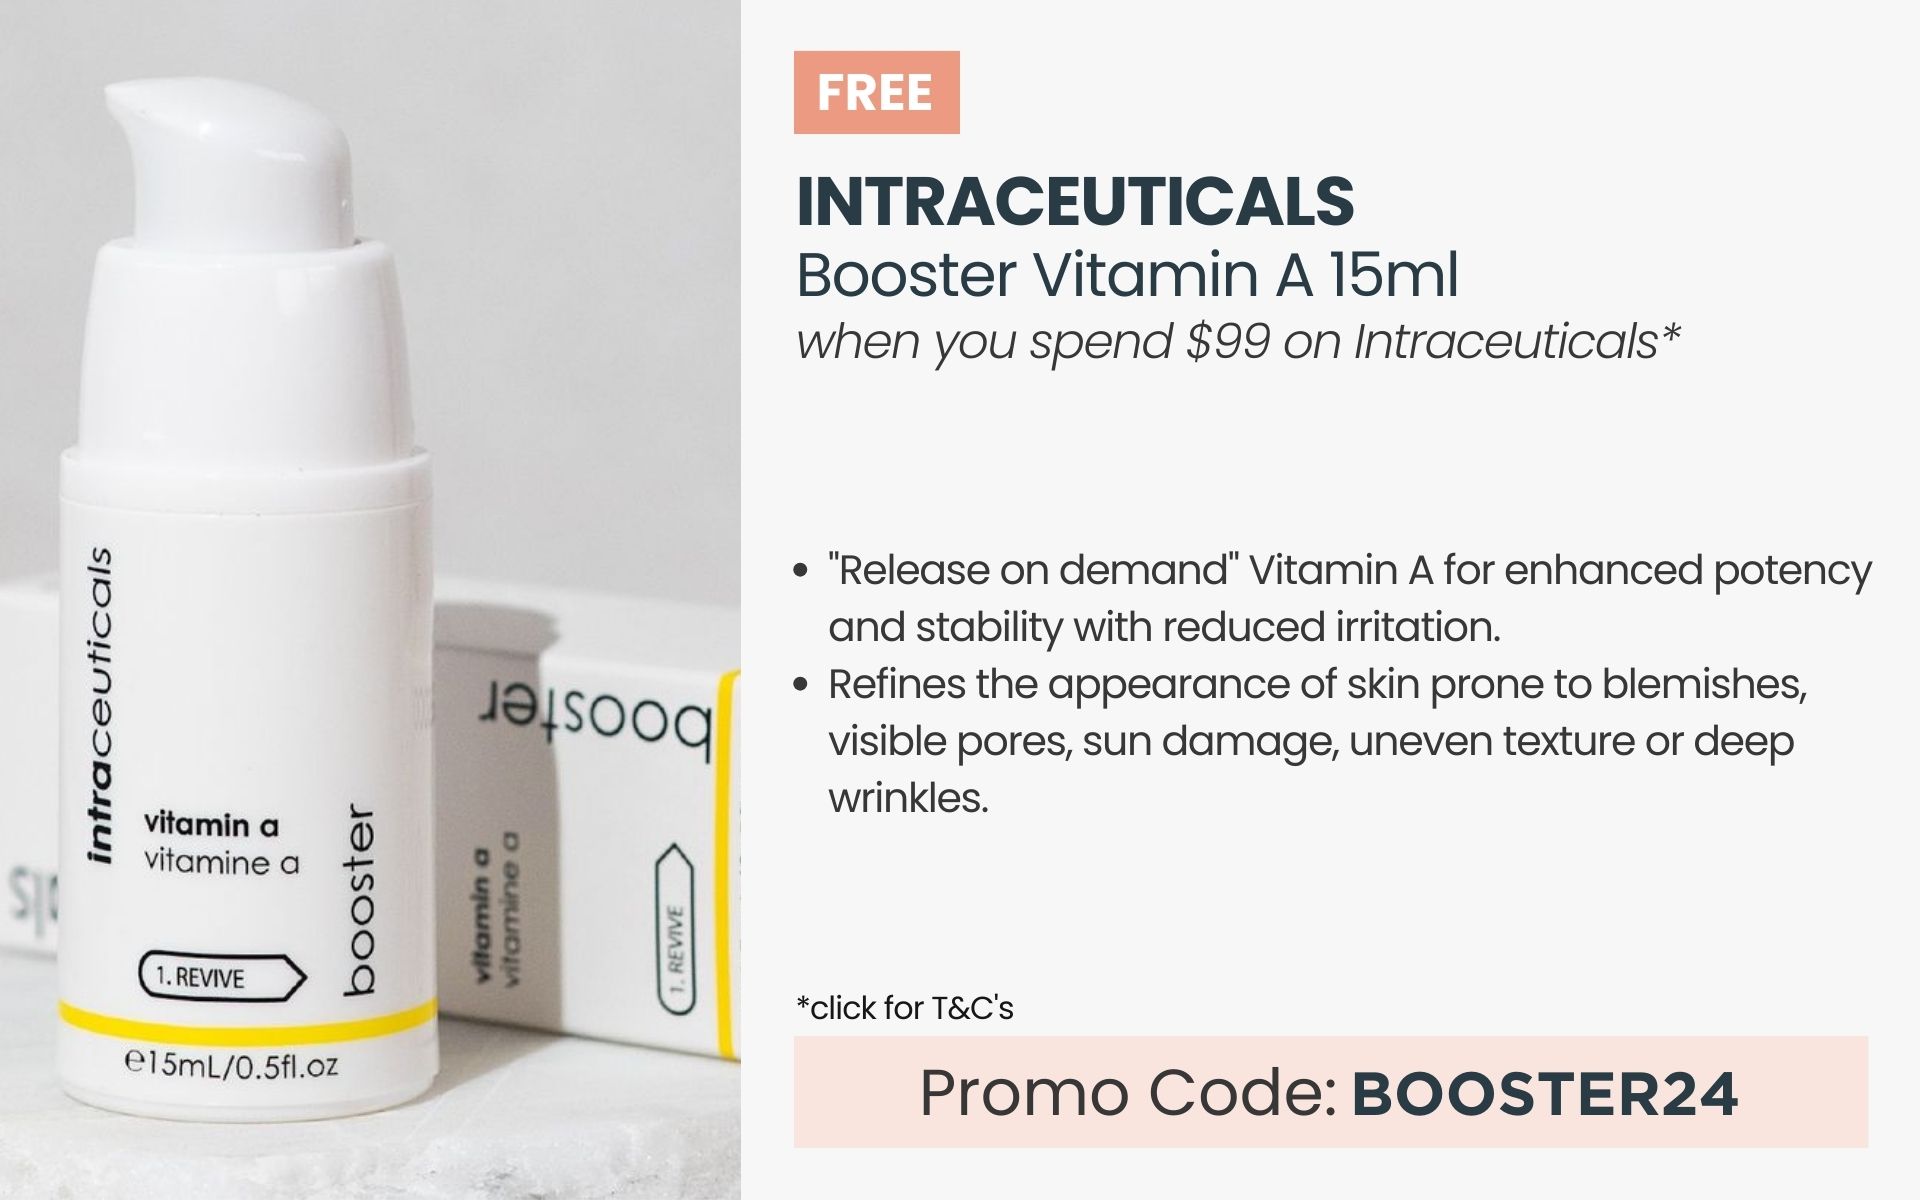 FREE Intraceuticals Booster Vitamin A 15ml worth $51. Min spend $99 on Intraceuticals. Promo code: BOOSTER24